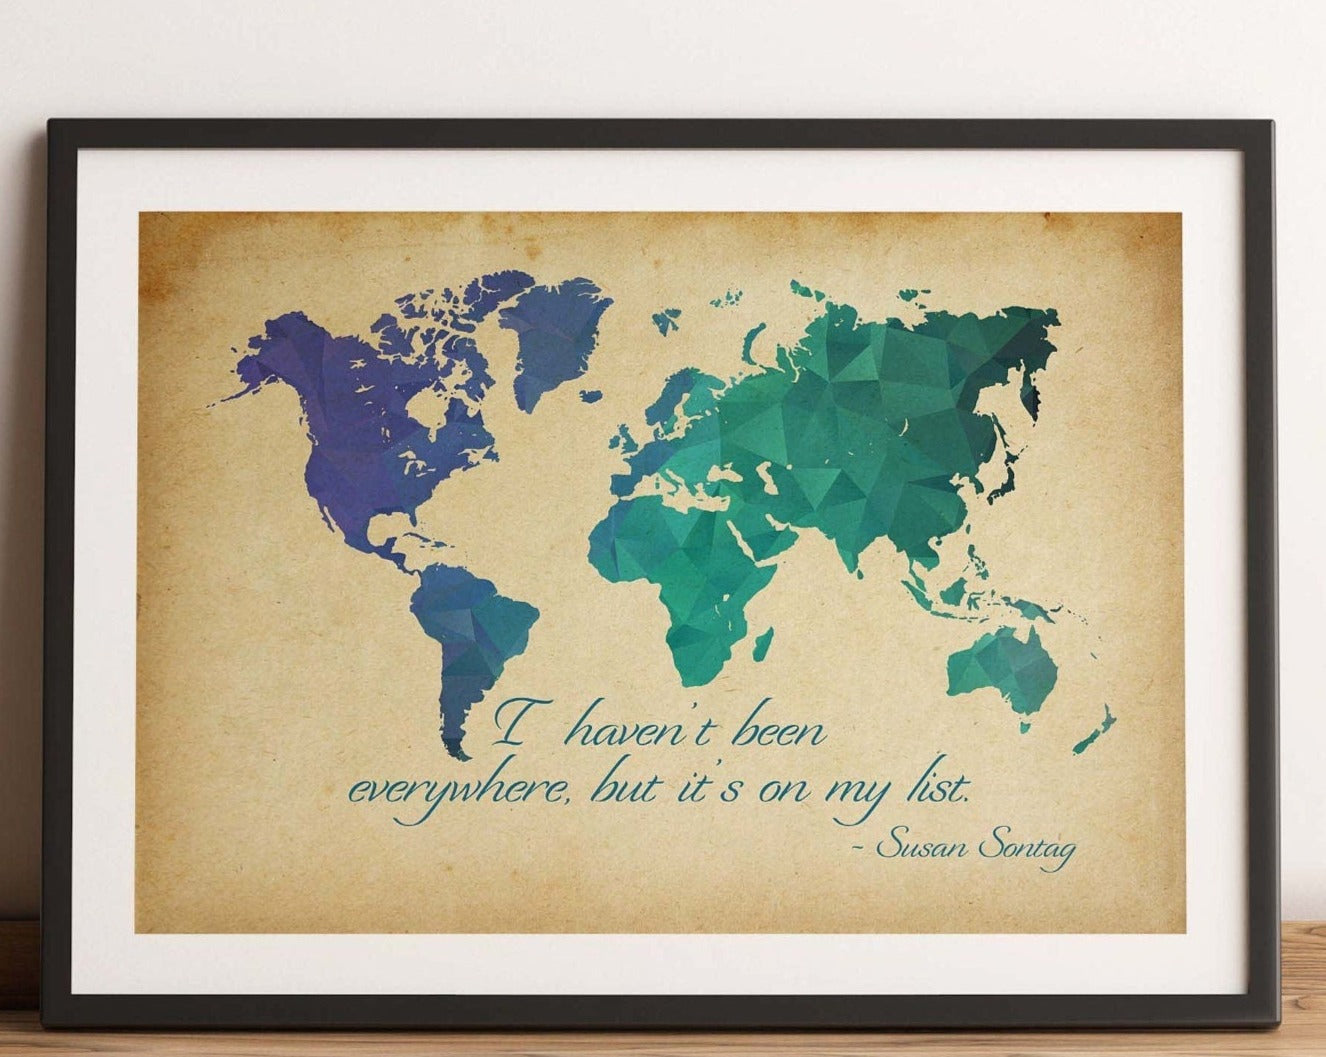 I haven't been everywhere, but it's on my list - Susan Sontag Print - Unframed travel poster wall art Low Poly Geometric World Map